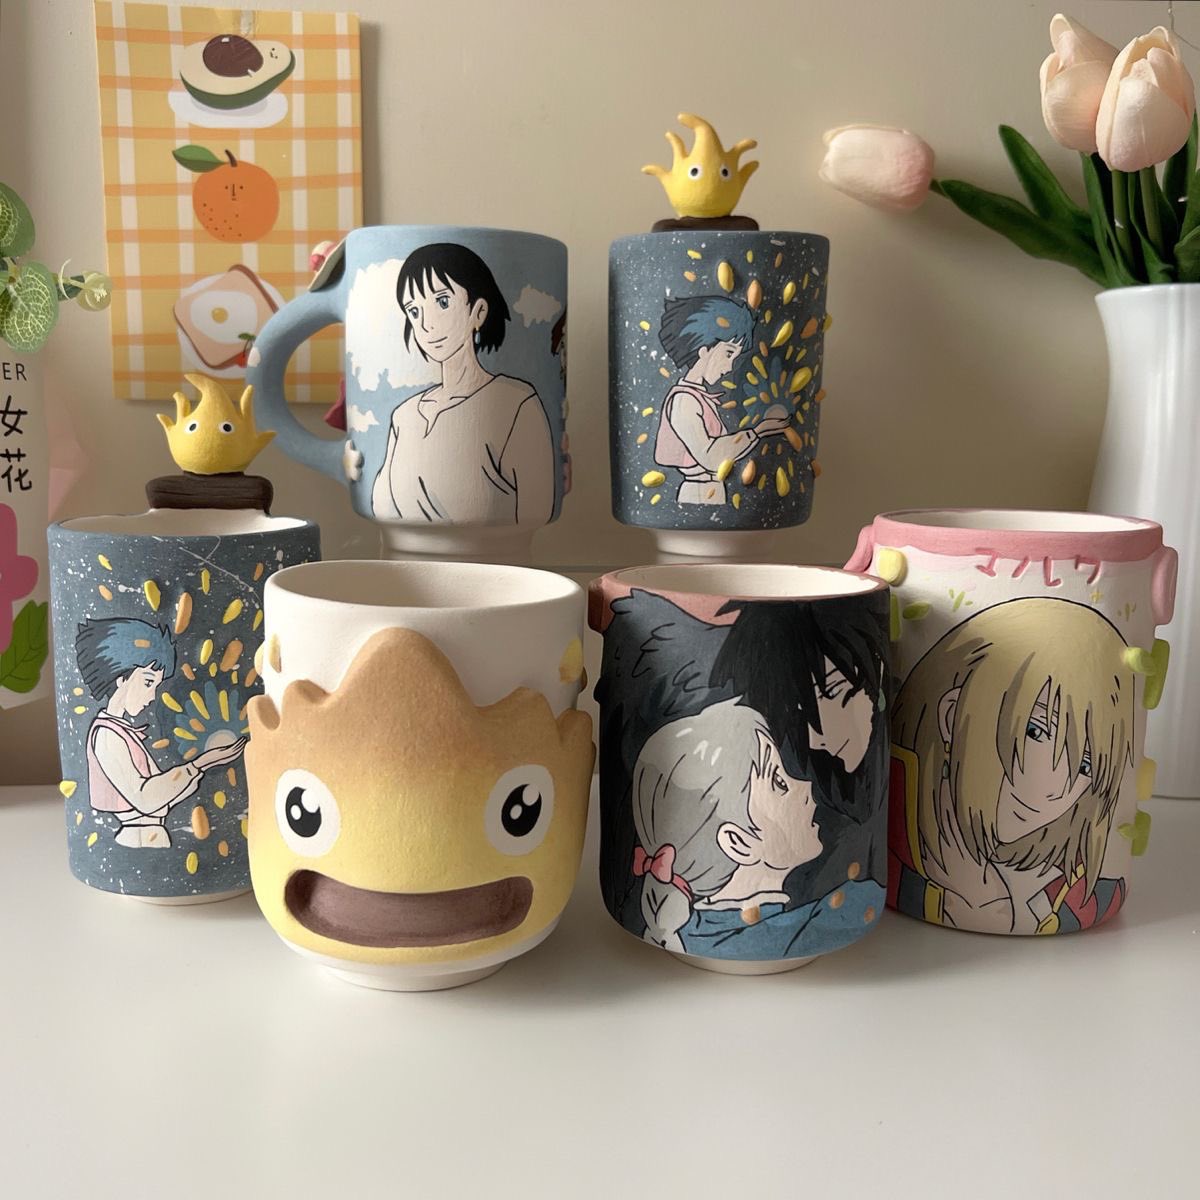 Howl’s moving castle cups 🏰